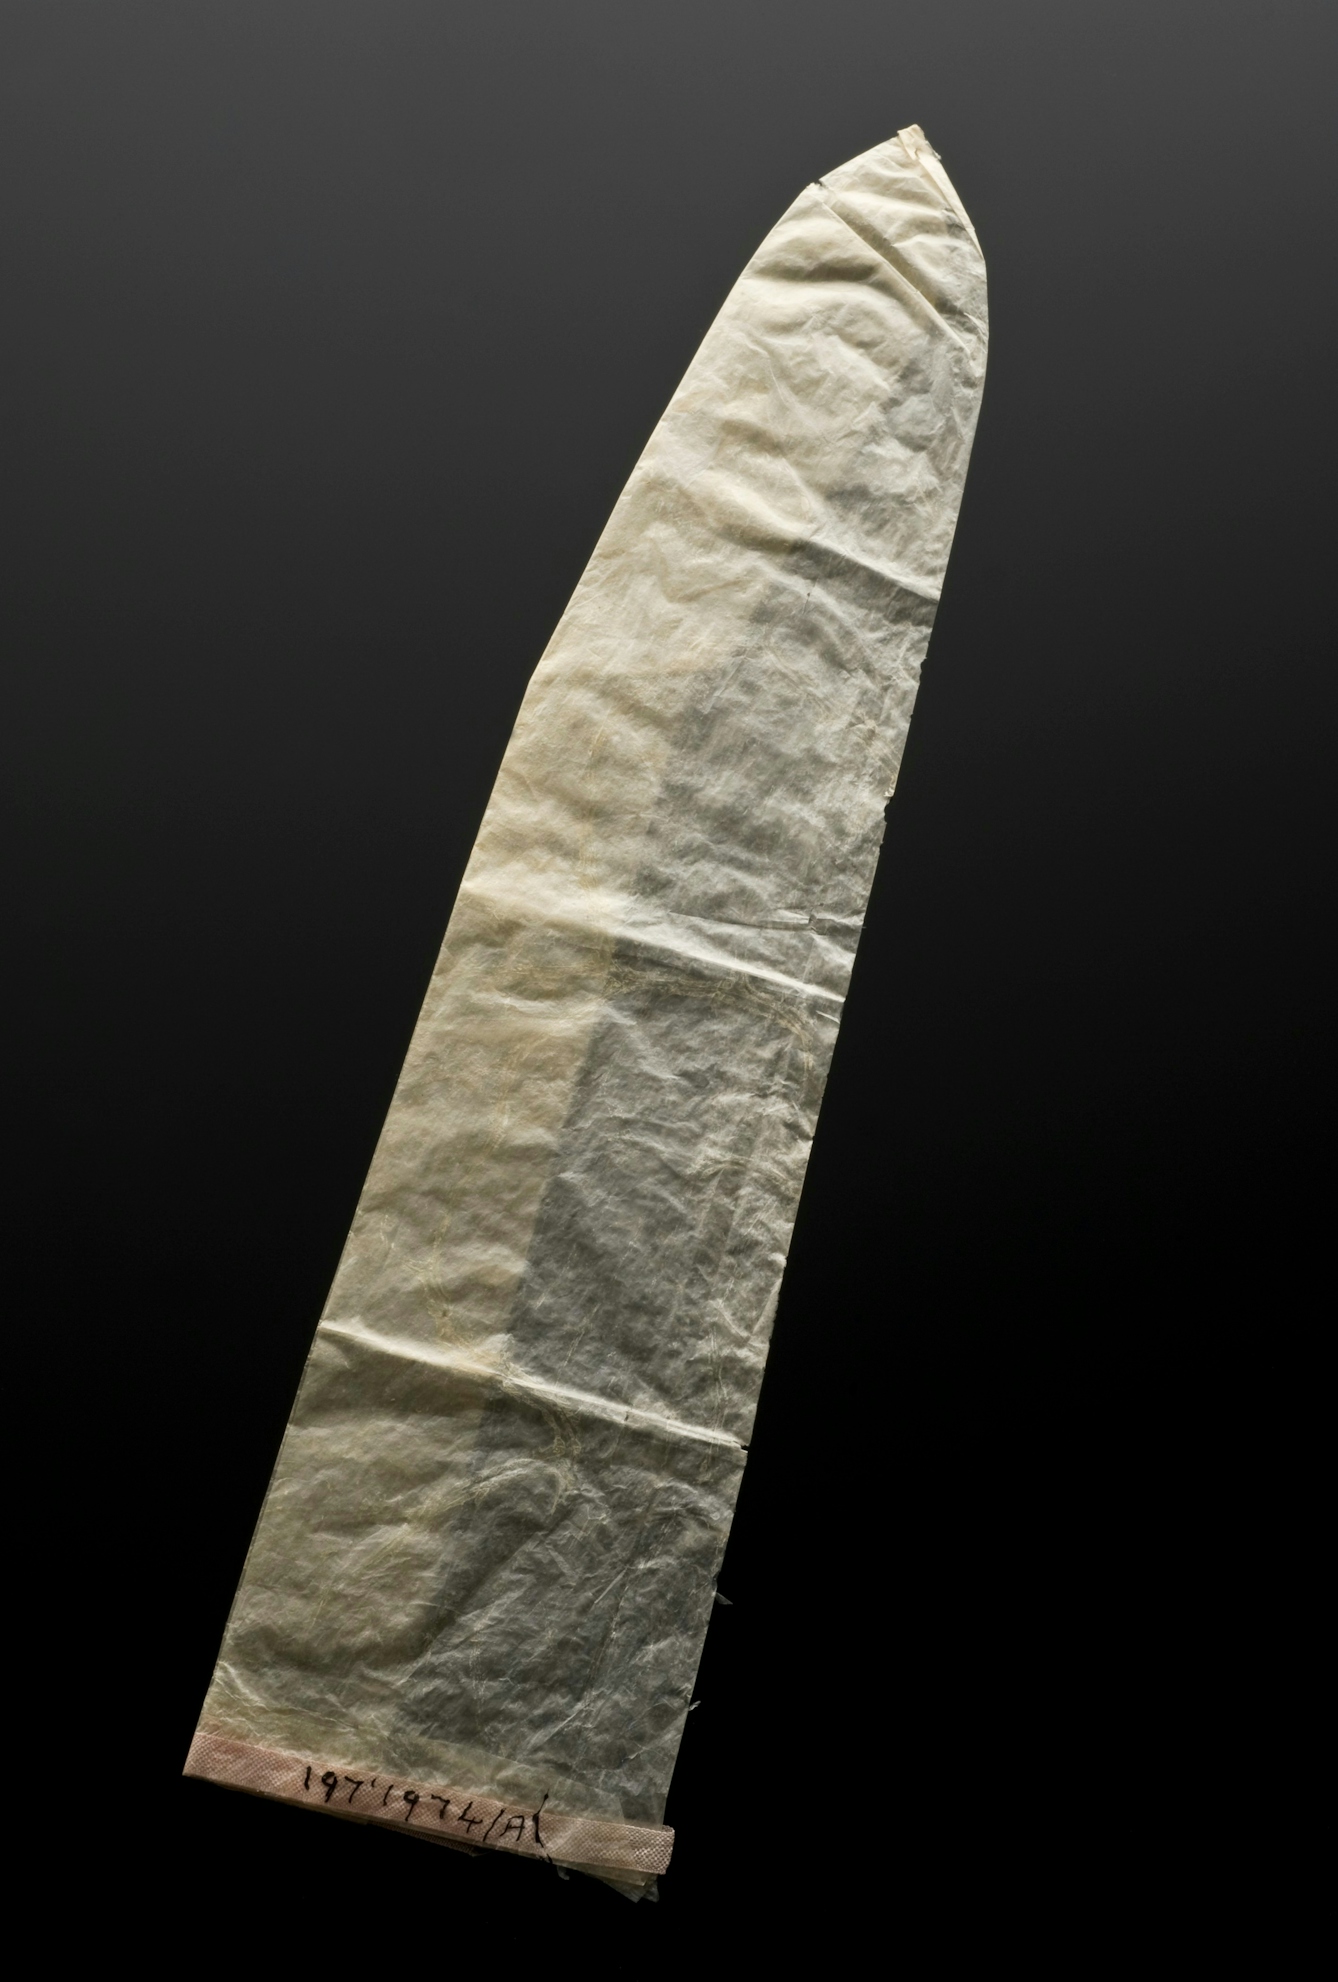 Photograph of a condom, England, 1901-1930, made of animal gut membrane, known as caecal, on a black background.